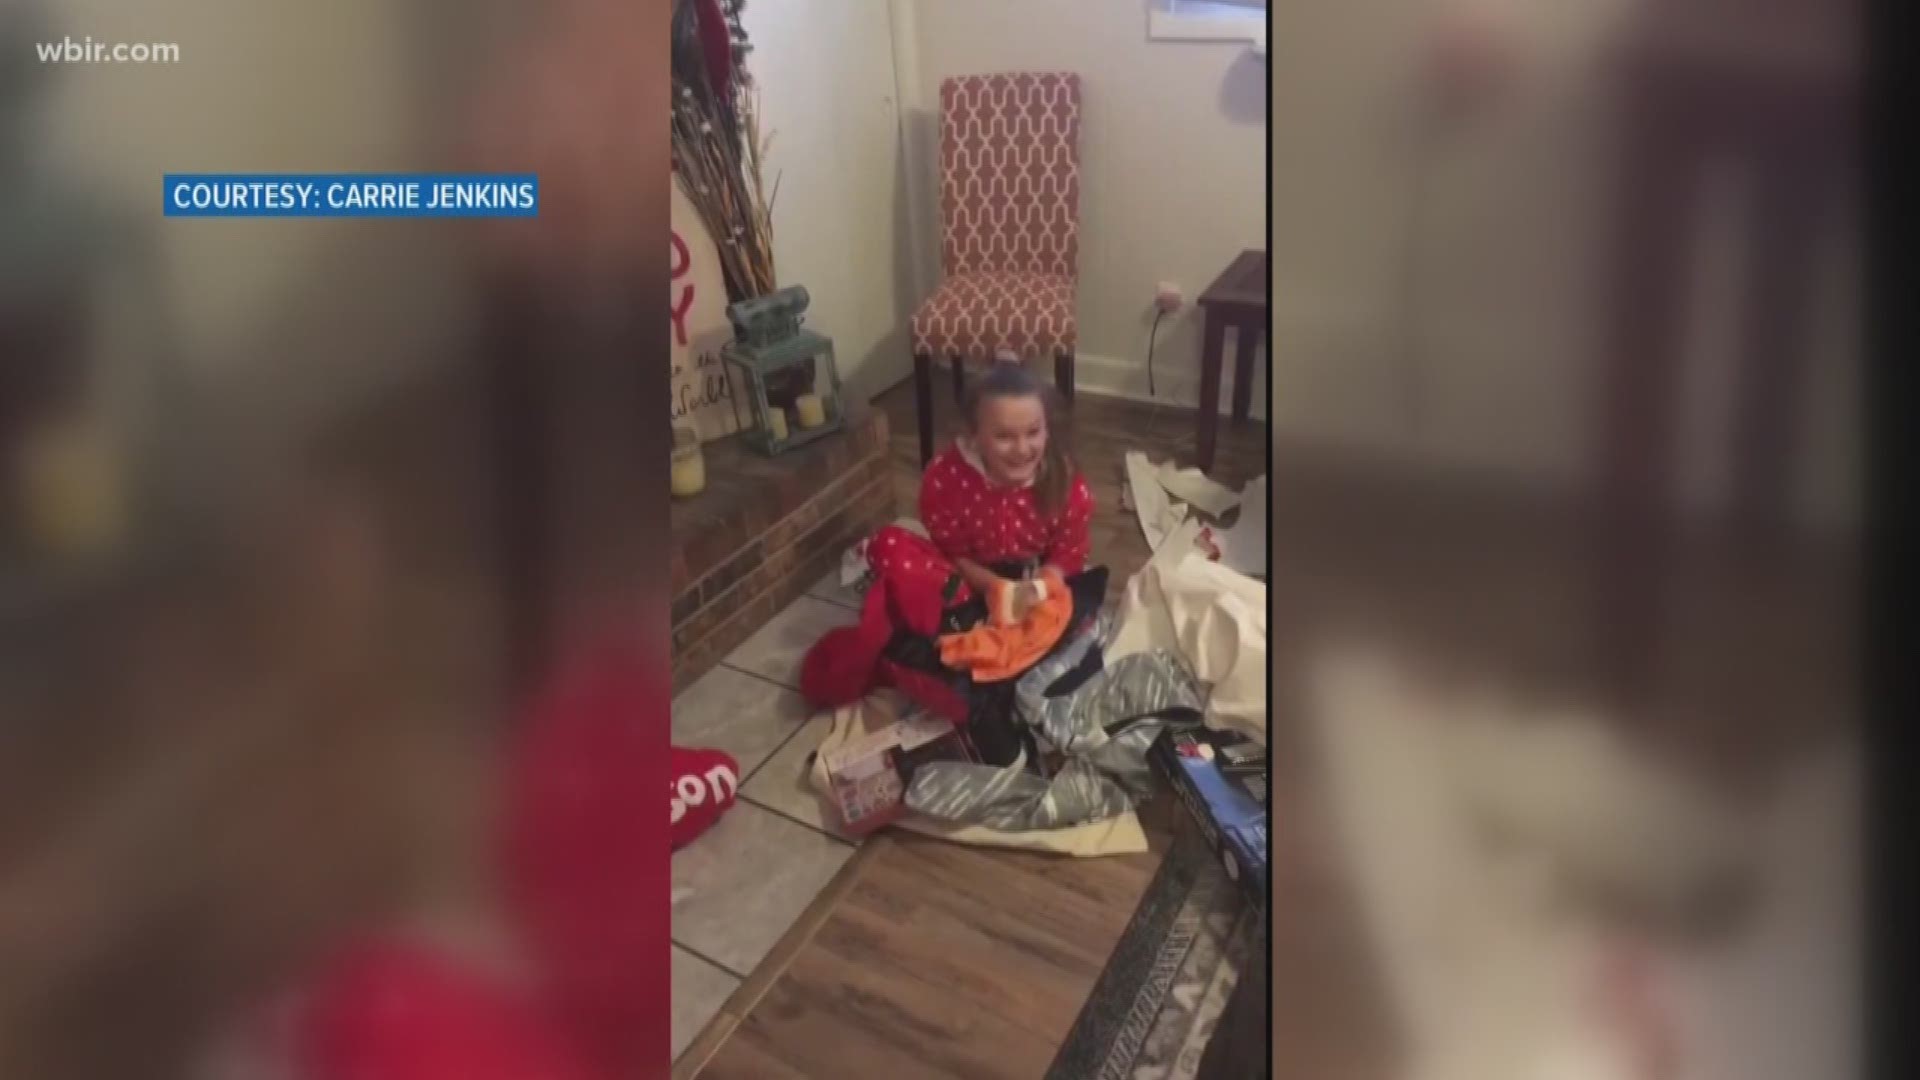 A young fan's Christmas Wish has now come true...after she received a jersey from her favorite Vol basketball player.